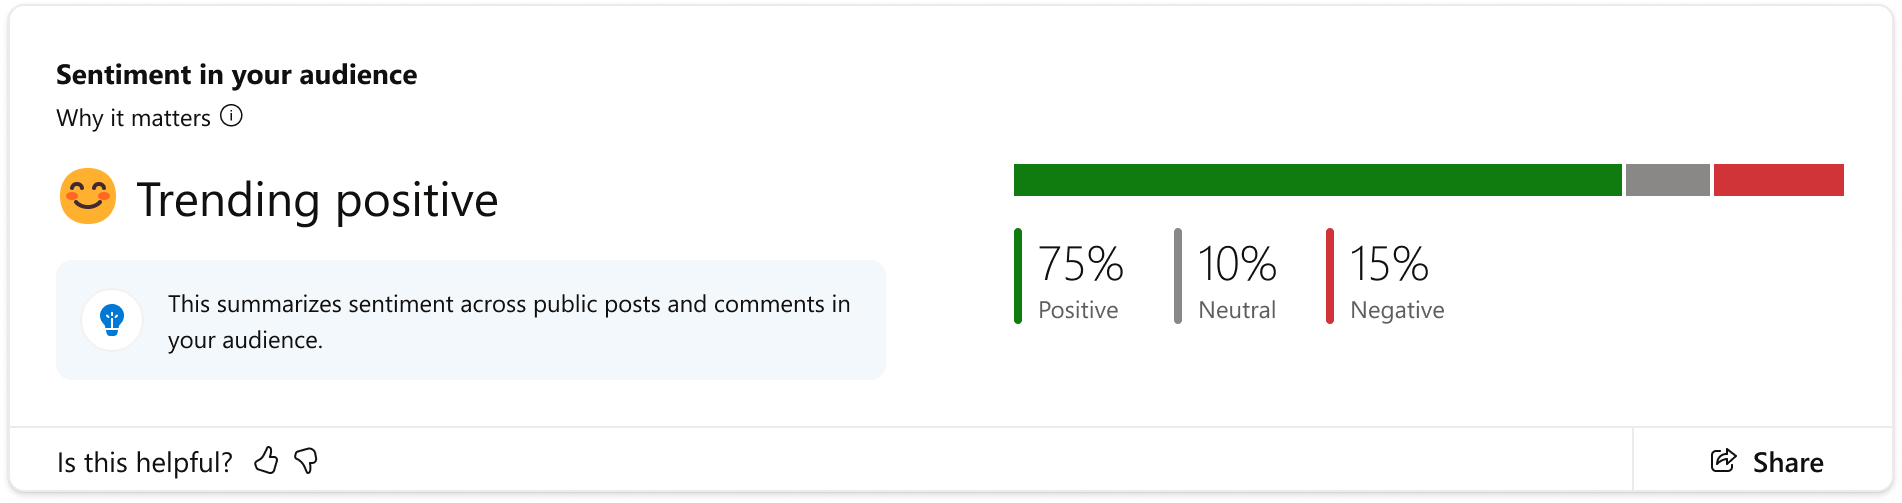 Sentiment shows how your audience is feeling overall.